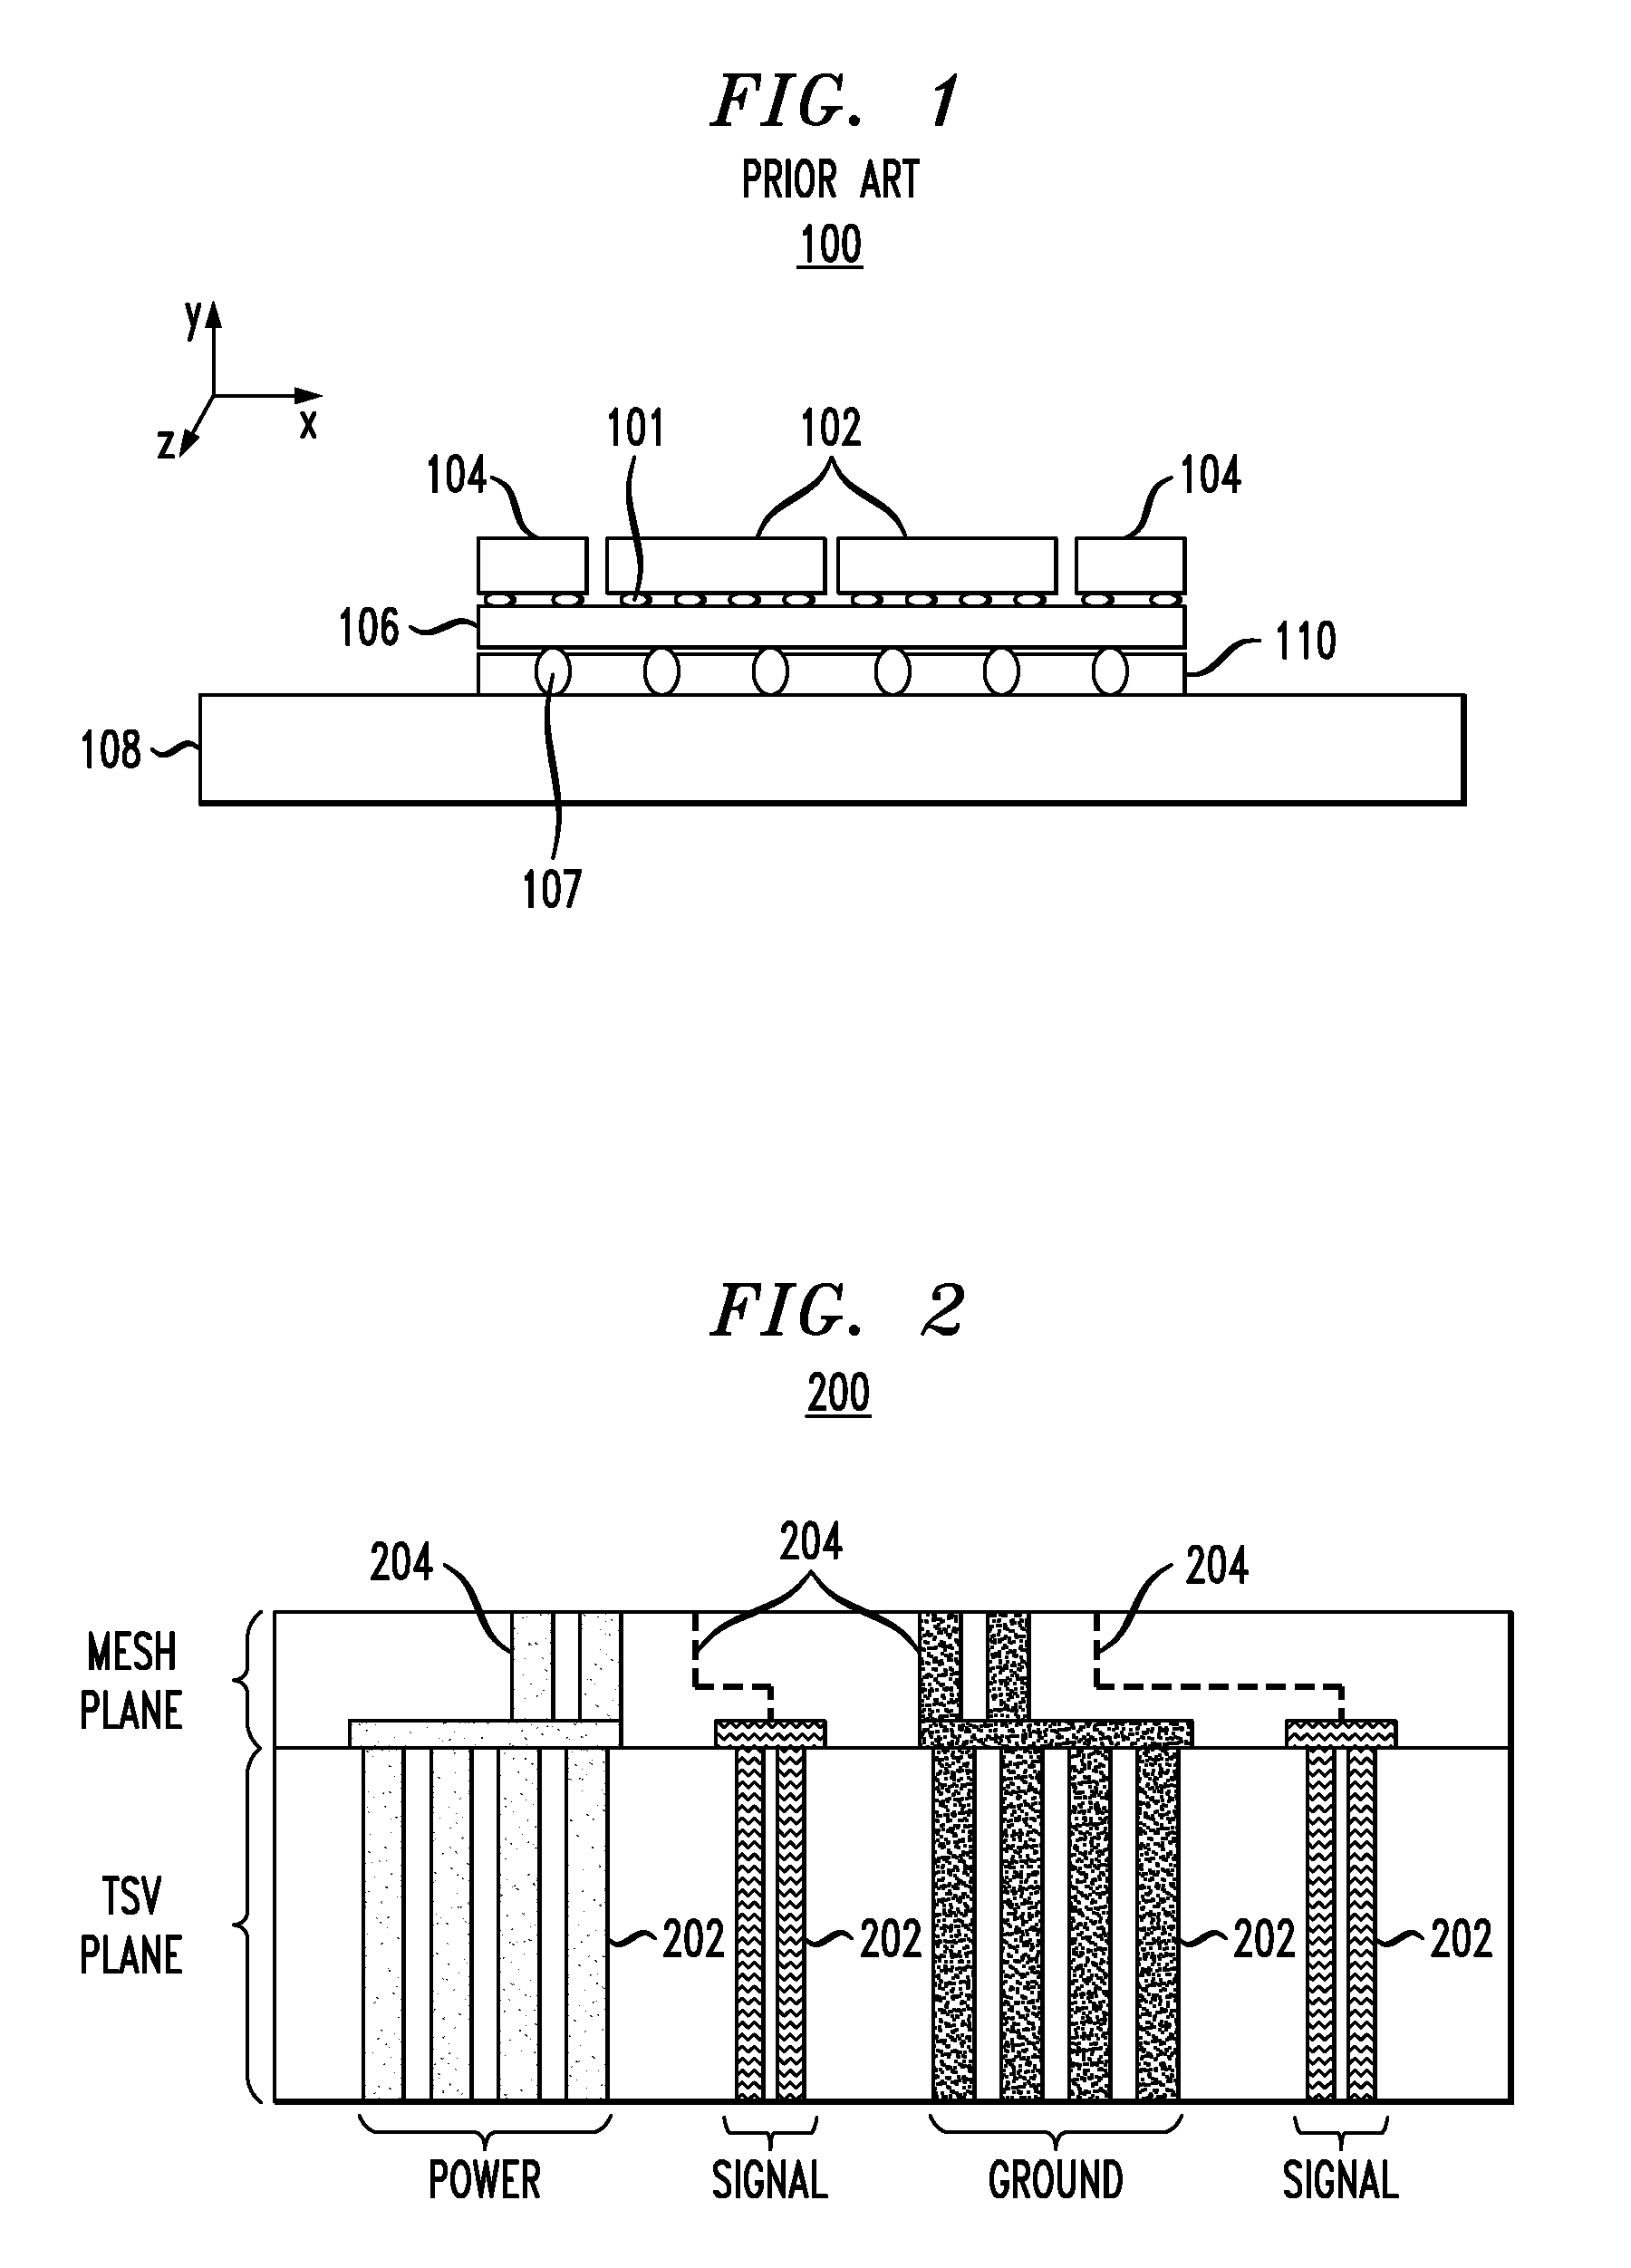 Three-dimensional silicon interposer for low voltage low power systems